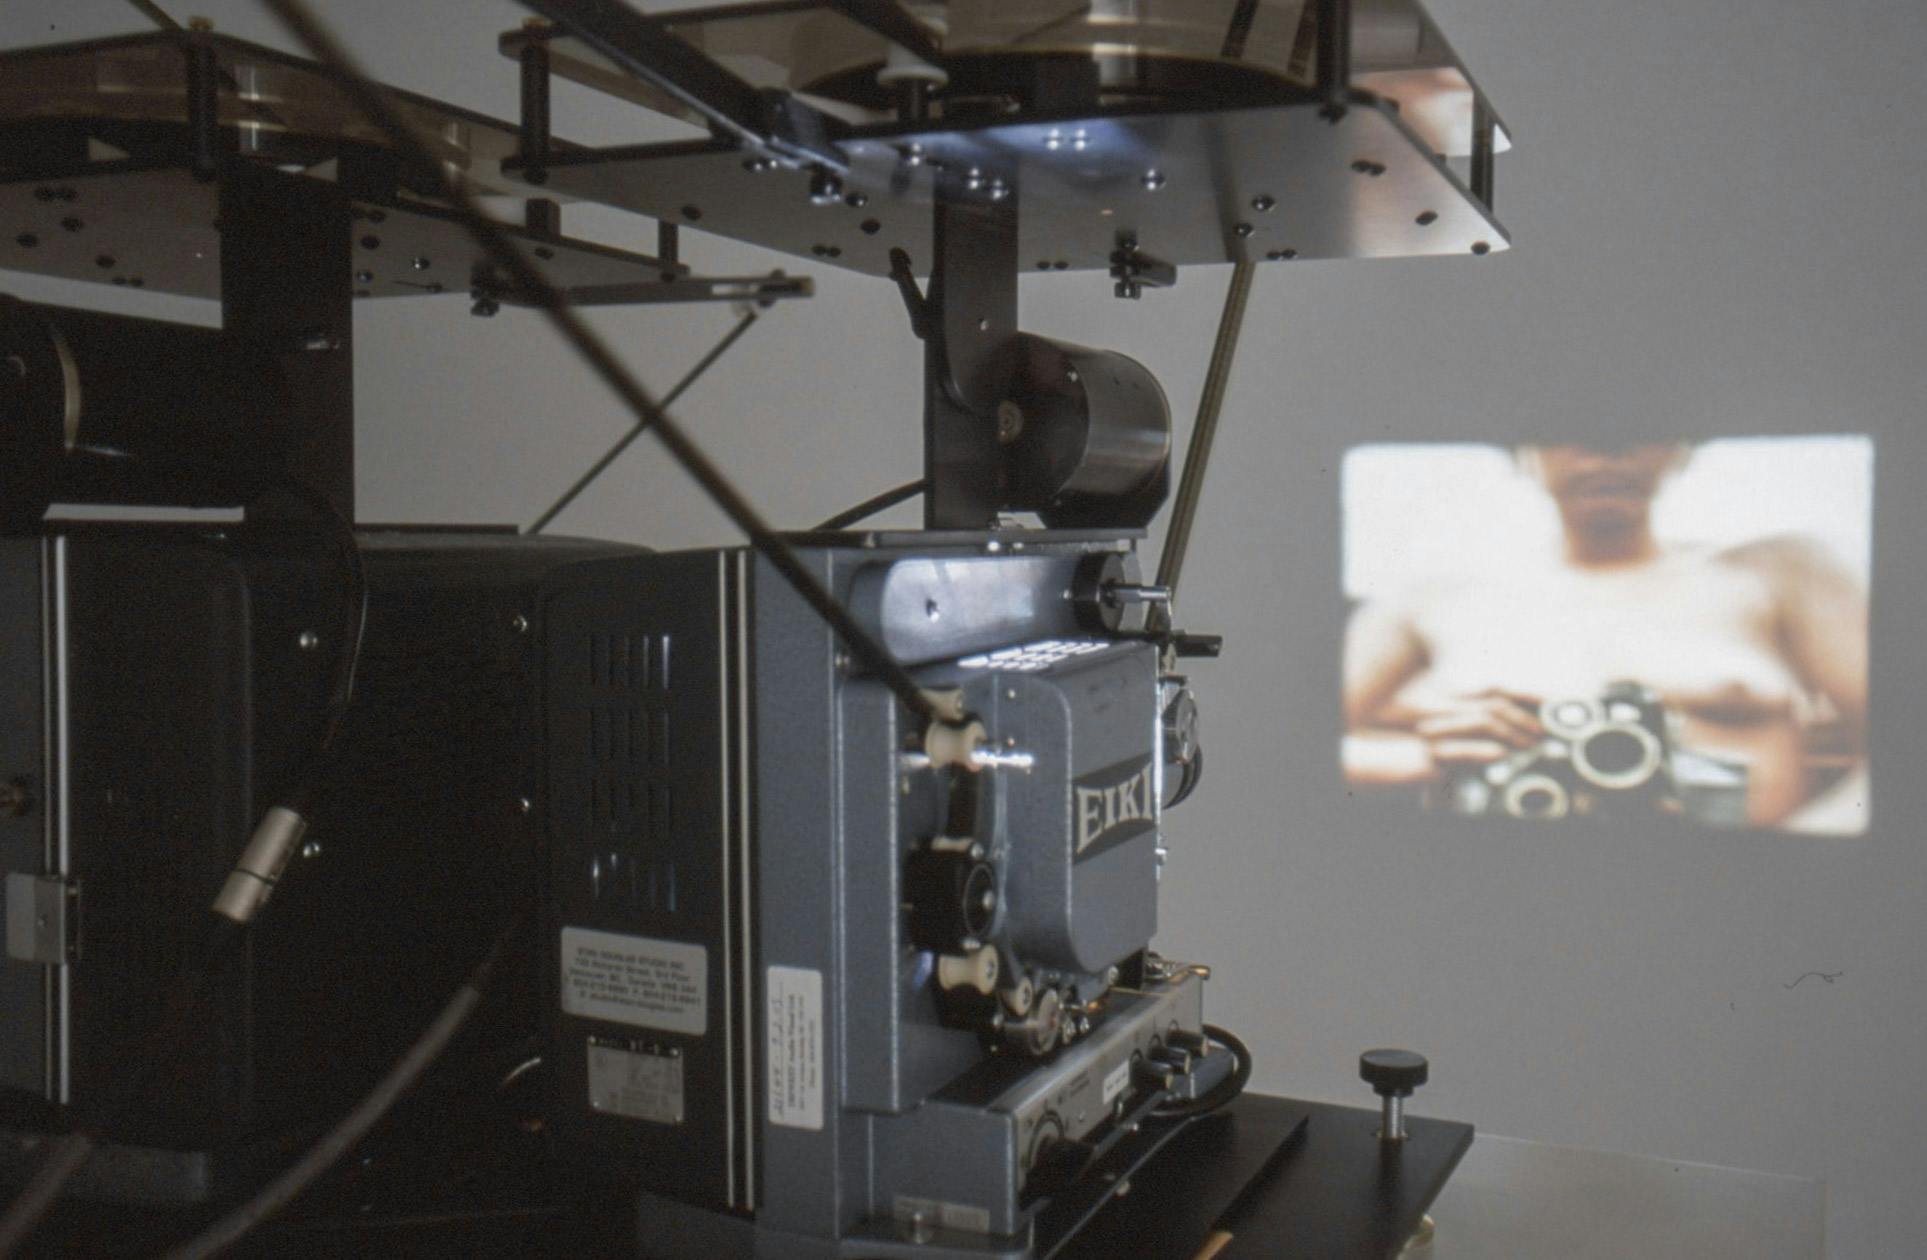 A closeup showing a film projector playing a video on a wall. The video shows a naked person sitting with a camera in their hands, filming.